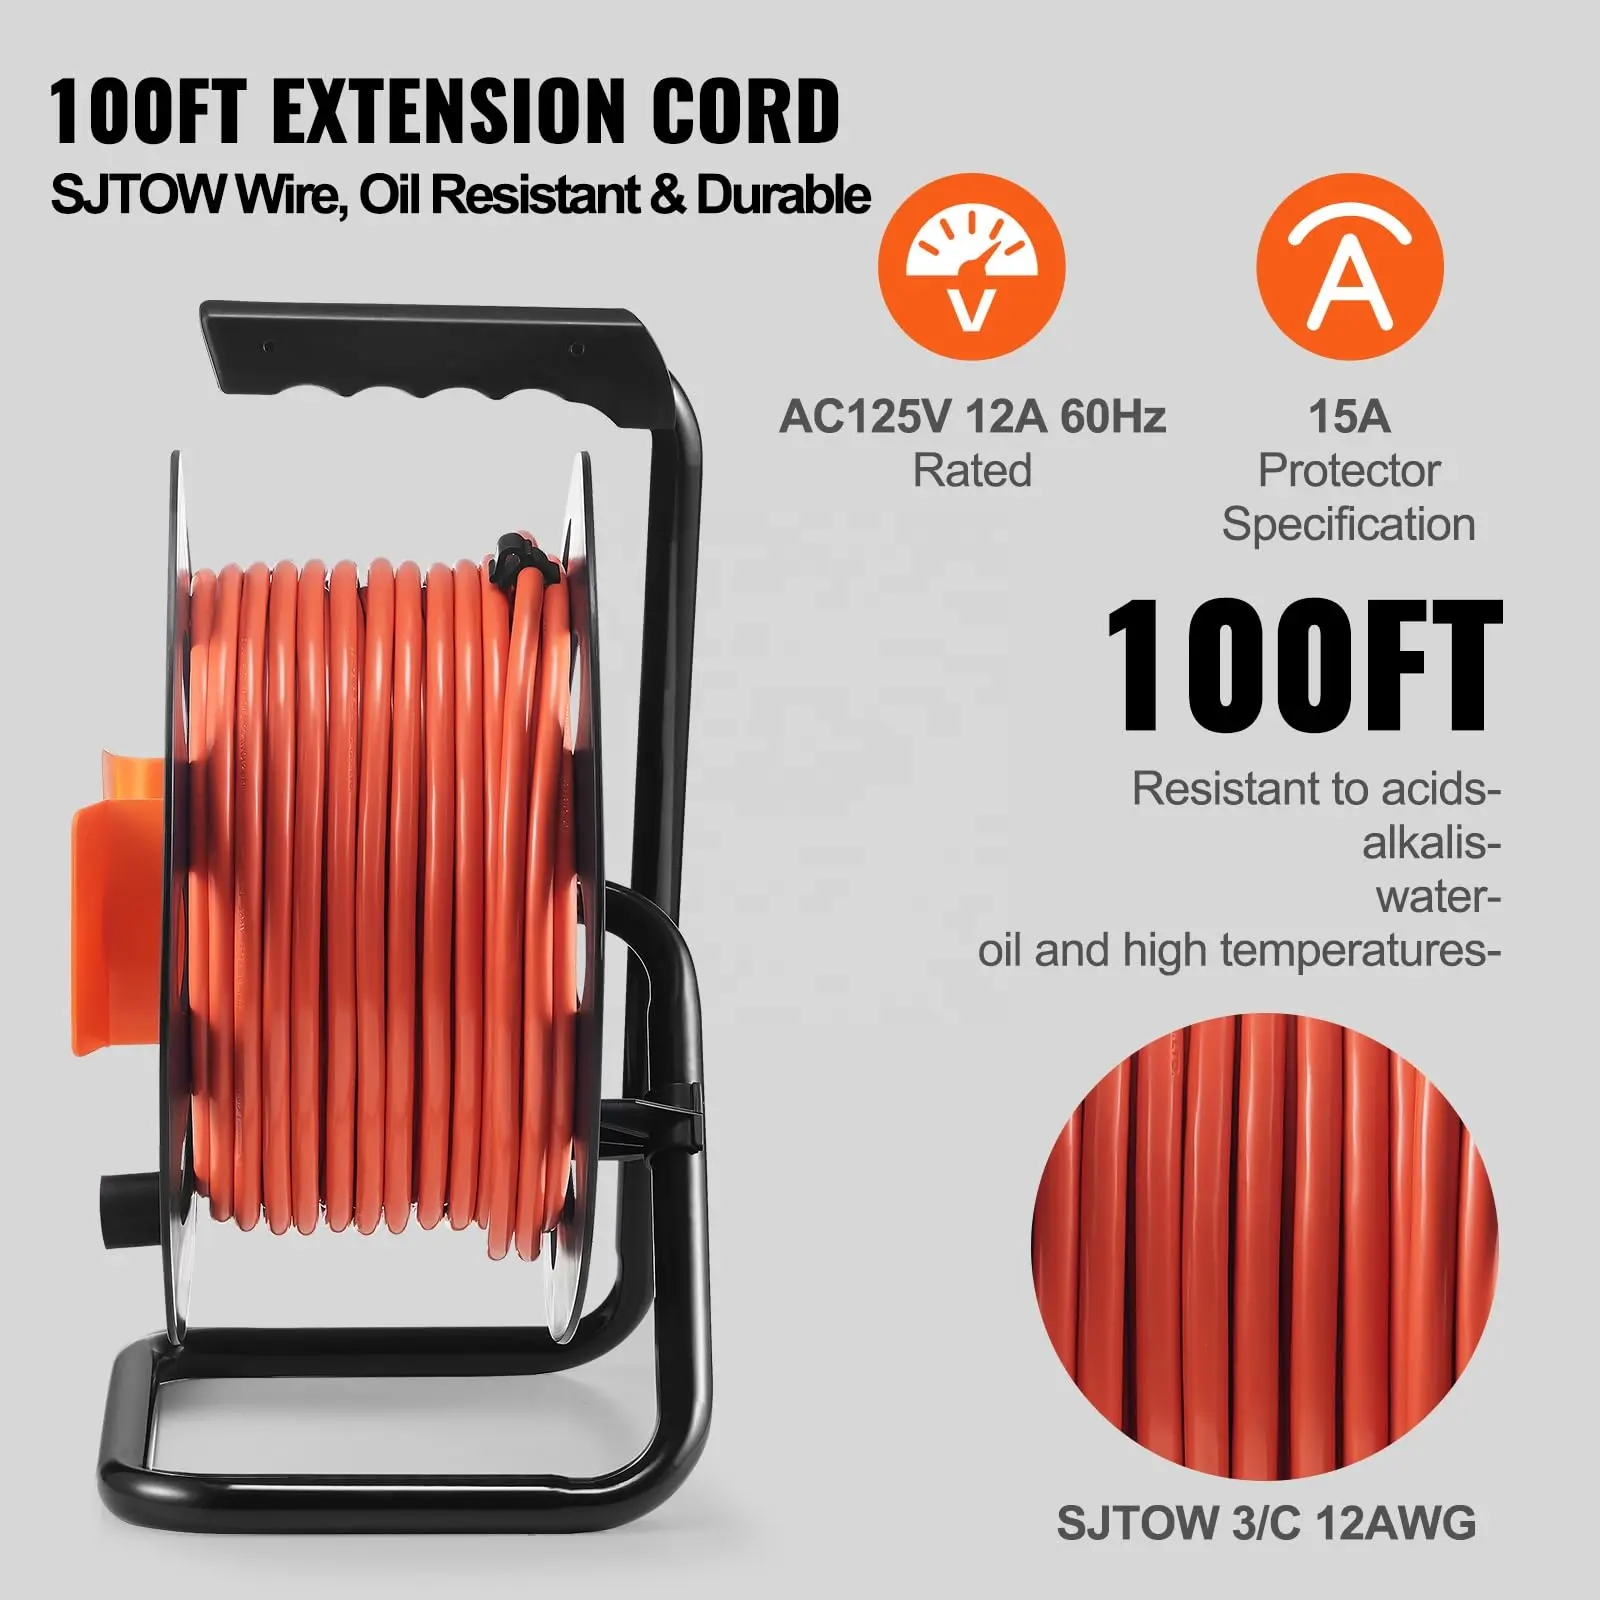 100F Heavy Duty 12AWG SJTOW Manual Cord Wire Reel With Extension Cord 100 ft Circuit Breaker with Heavy Duty Extension Cord Reel